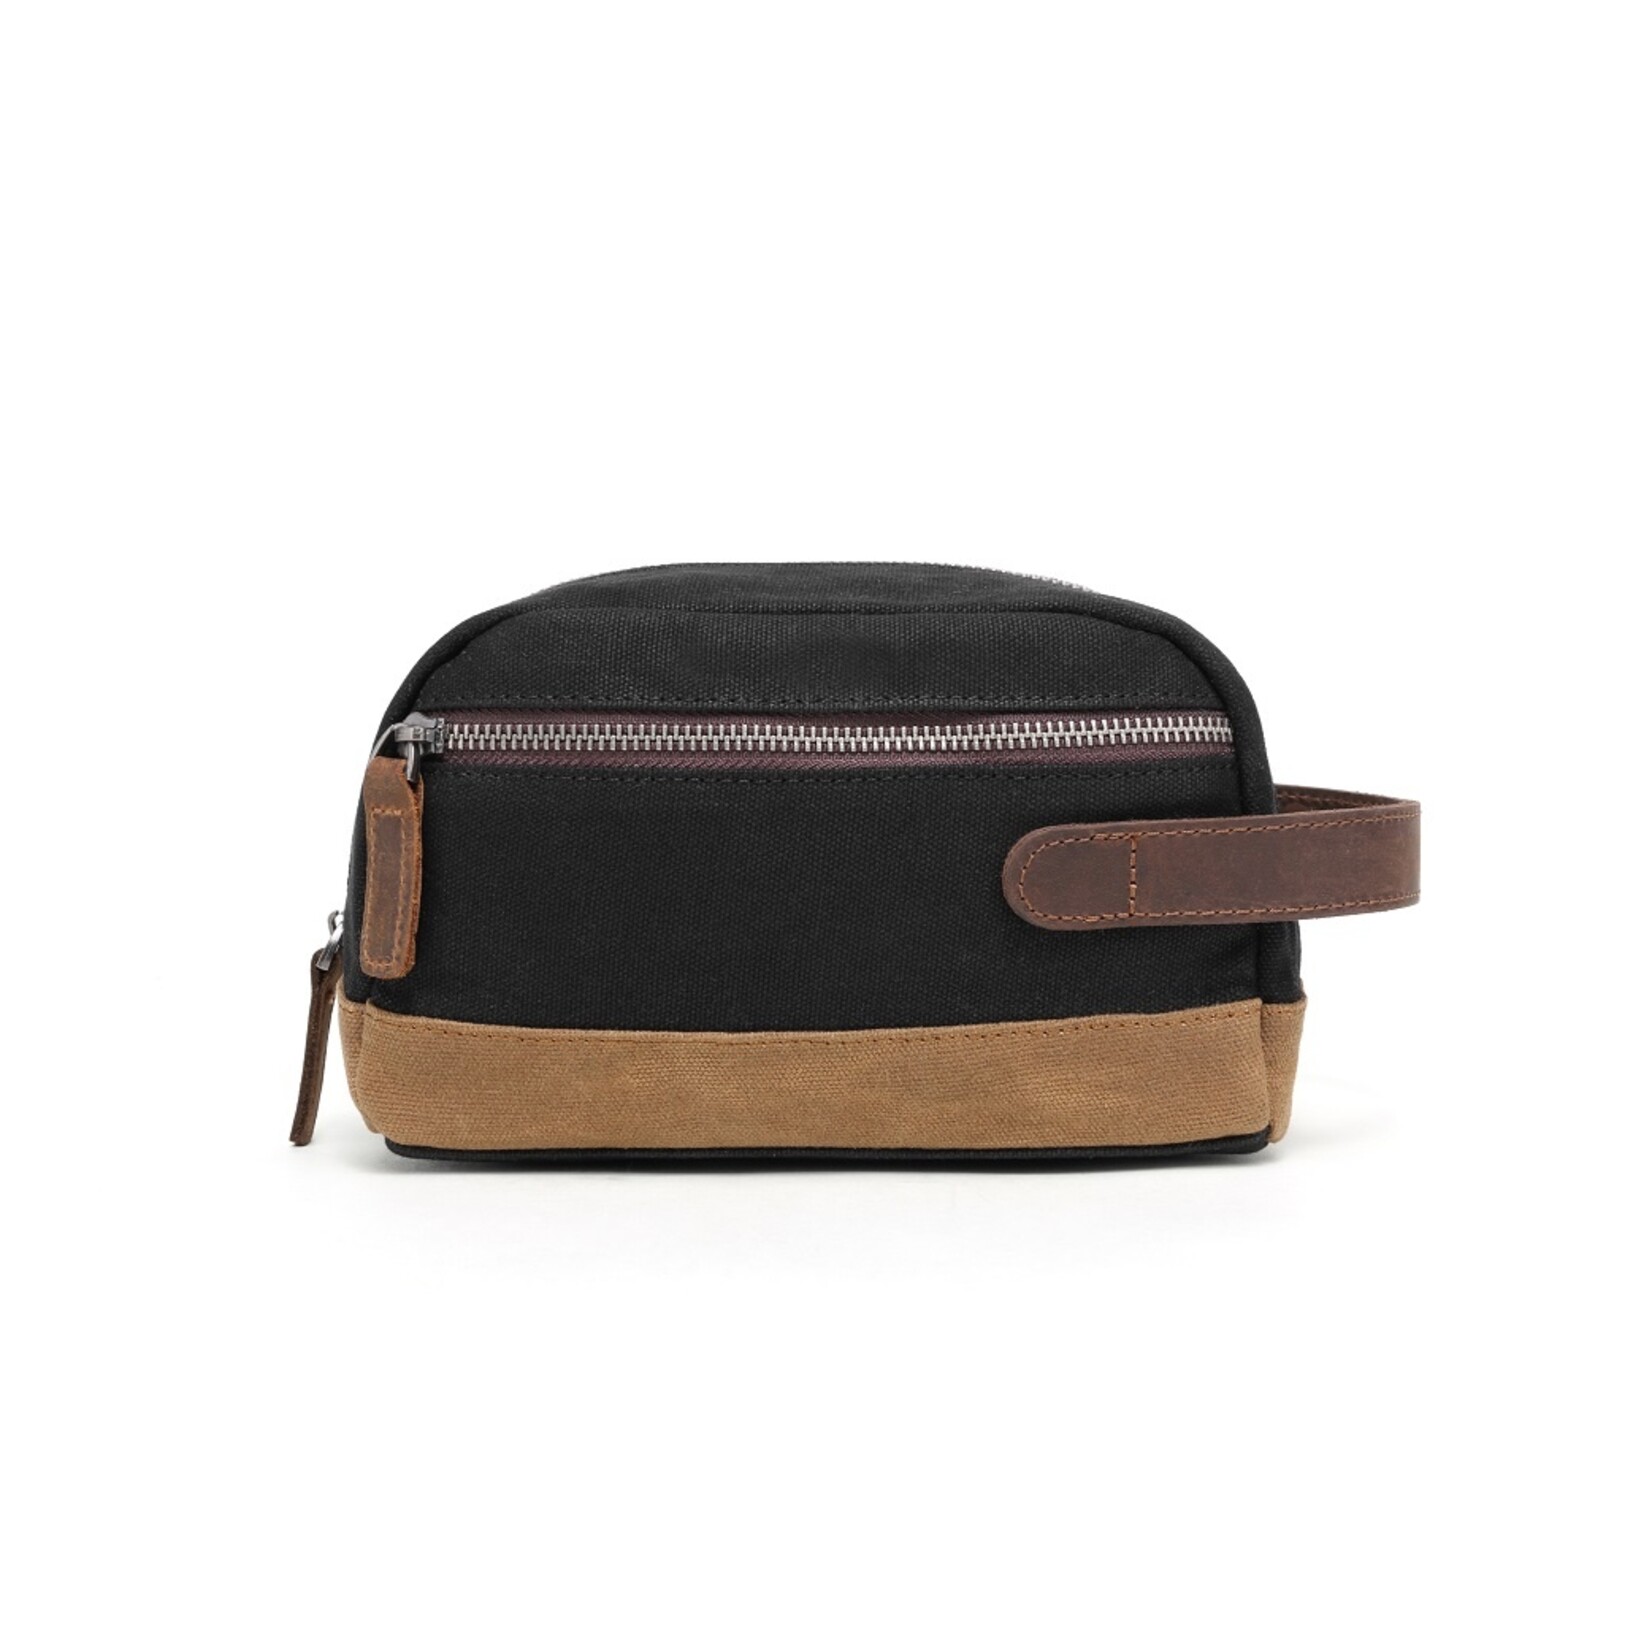 Waxed Canvas Toiletry Bag - Blue